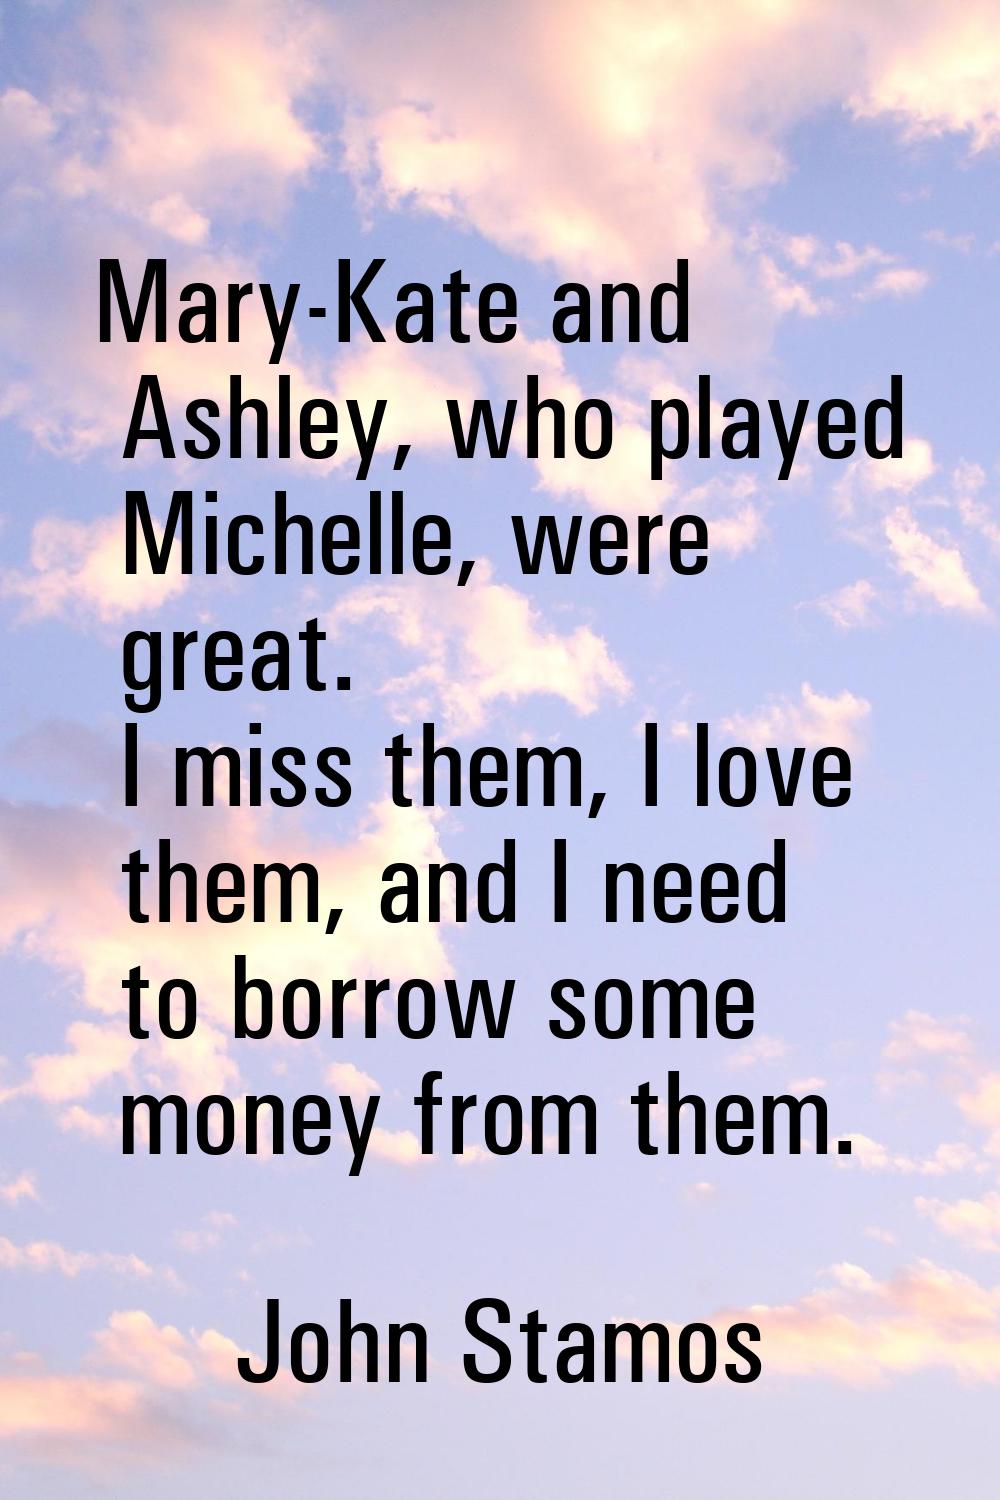 Mary-Kate and Ashley, who played Michelle, were great. I miss them, I love them, and I need to borr